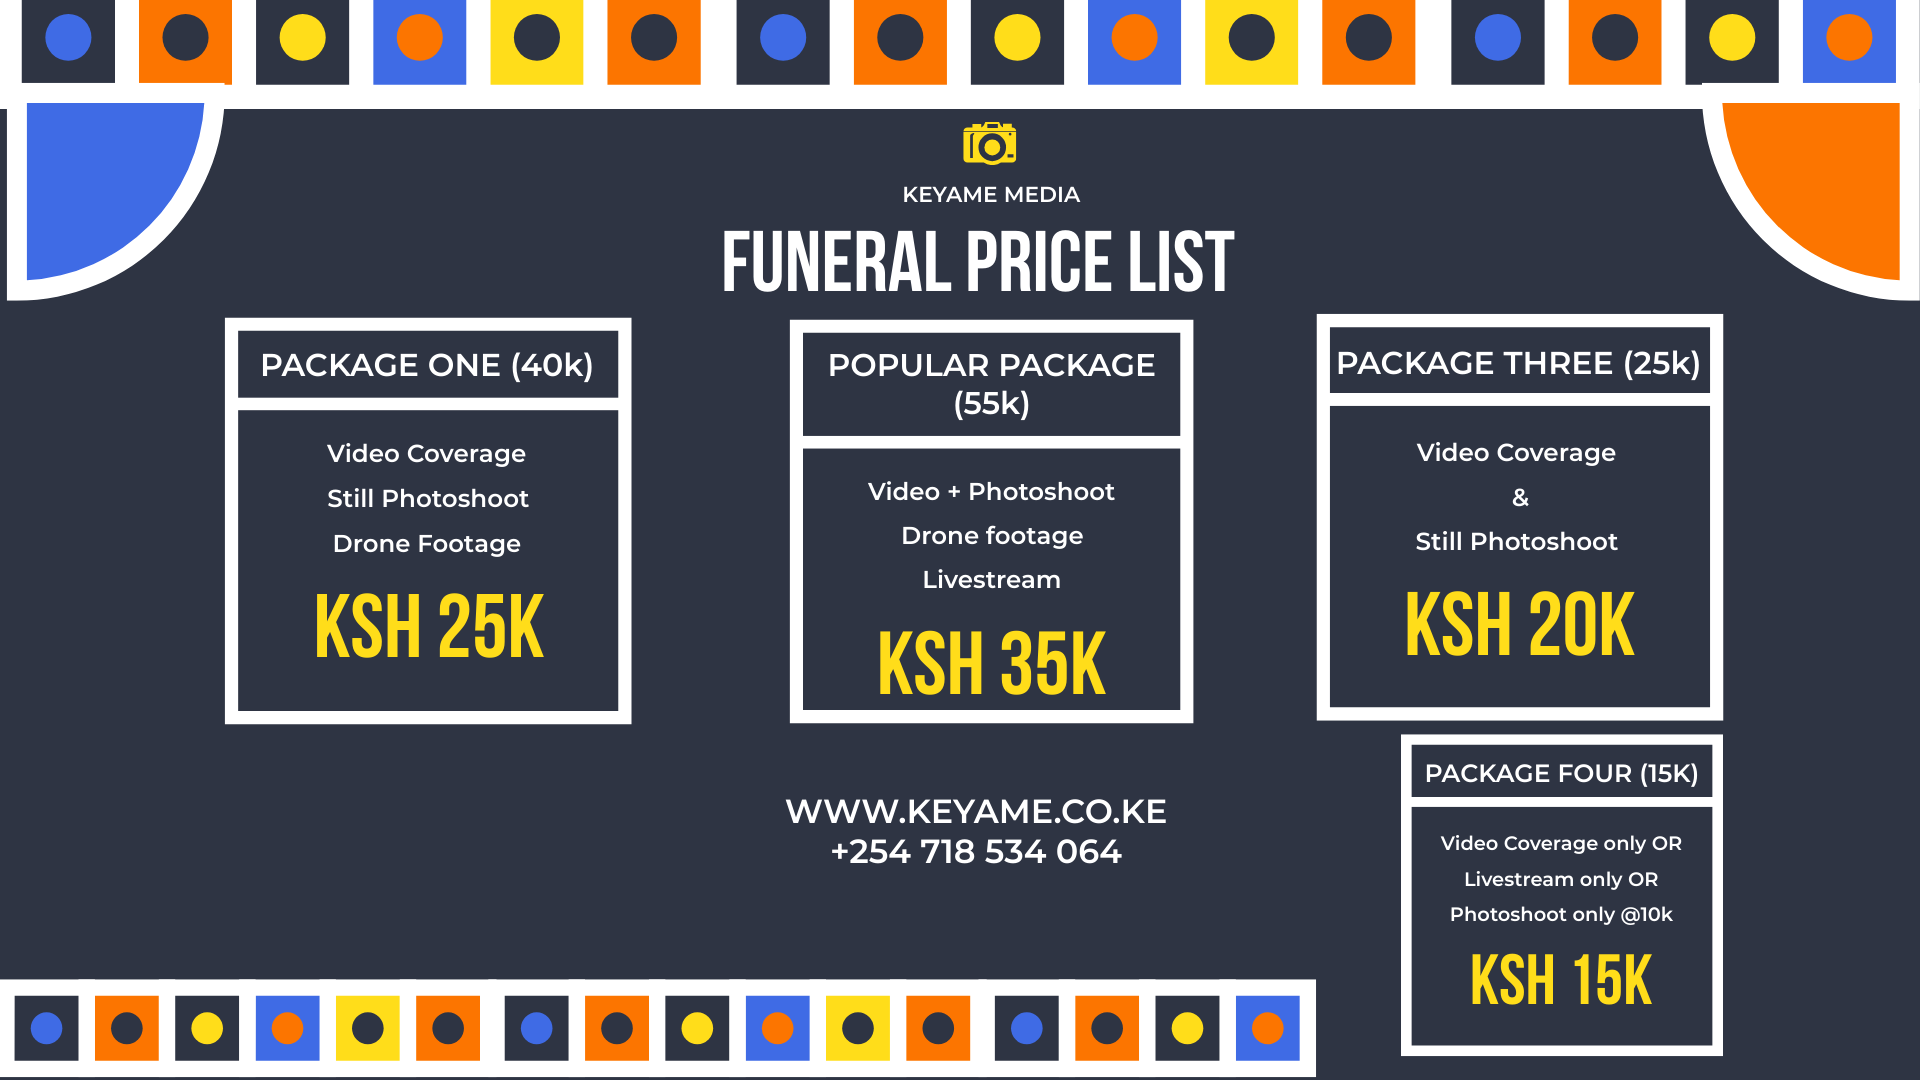 FUNERAL VIDEO COVERAGE & PHOTOGRAPHY PACKAGES